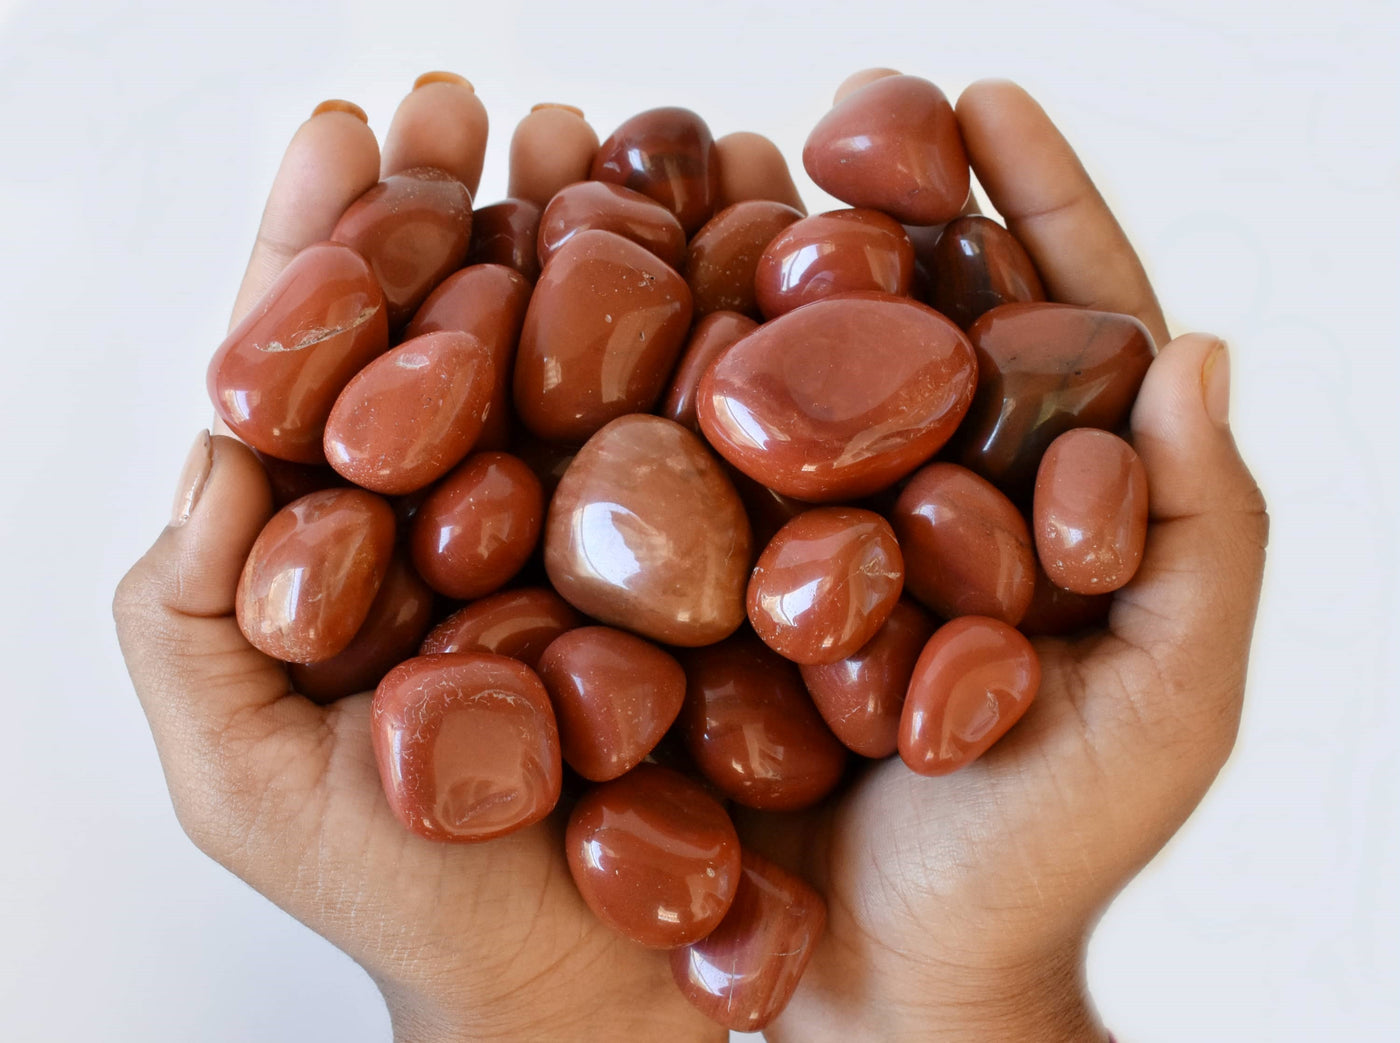 Red Jasper Tumbled Crystals (Breaking Addictions and Strength)